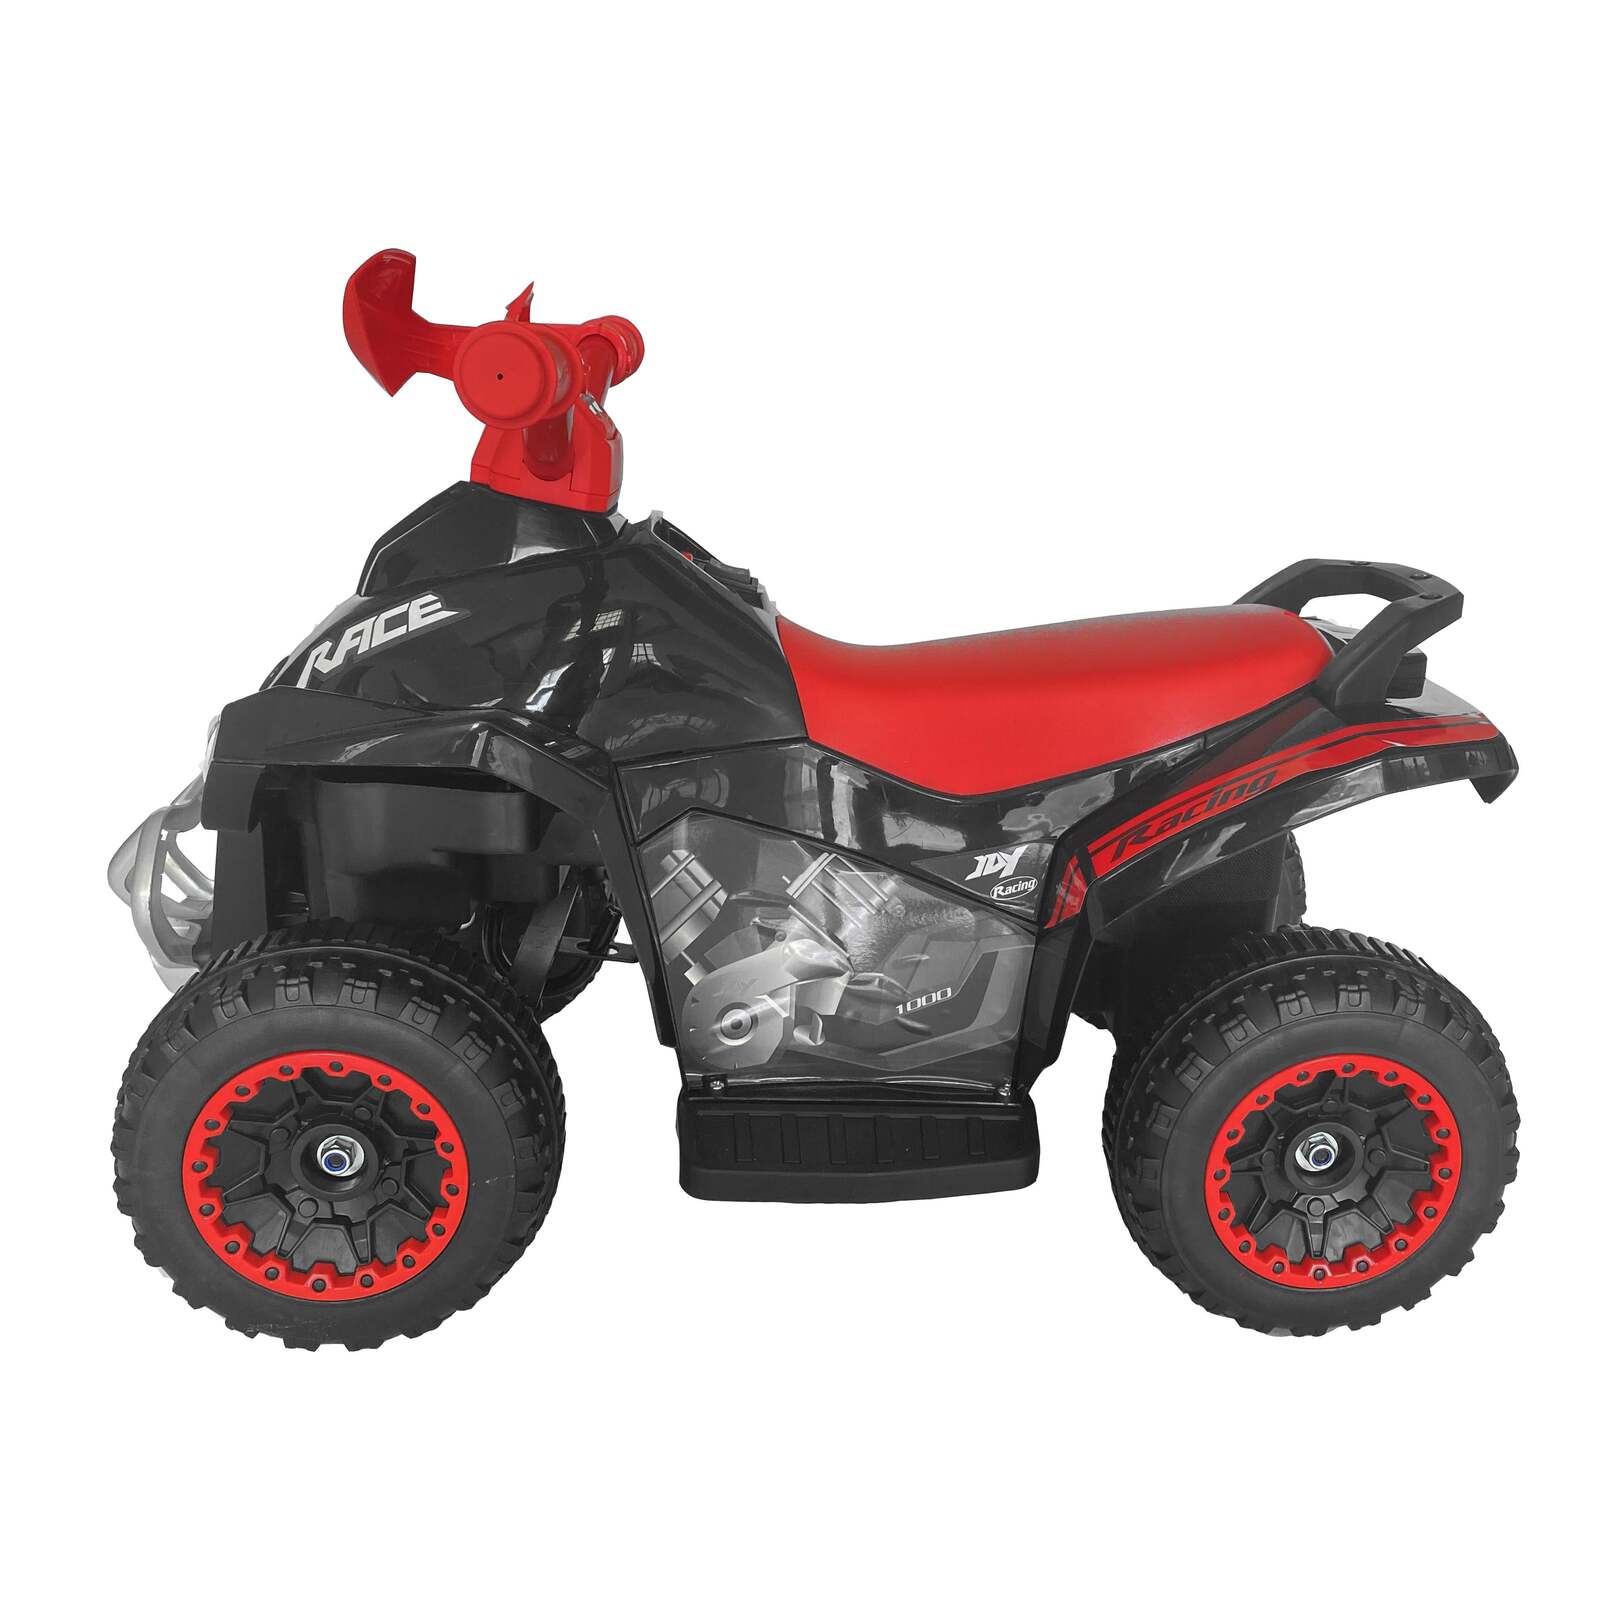 Quad Ride-on Electronic 4 Wheel ATV (Black) for Children - Up To 3km/h